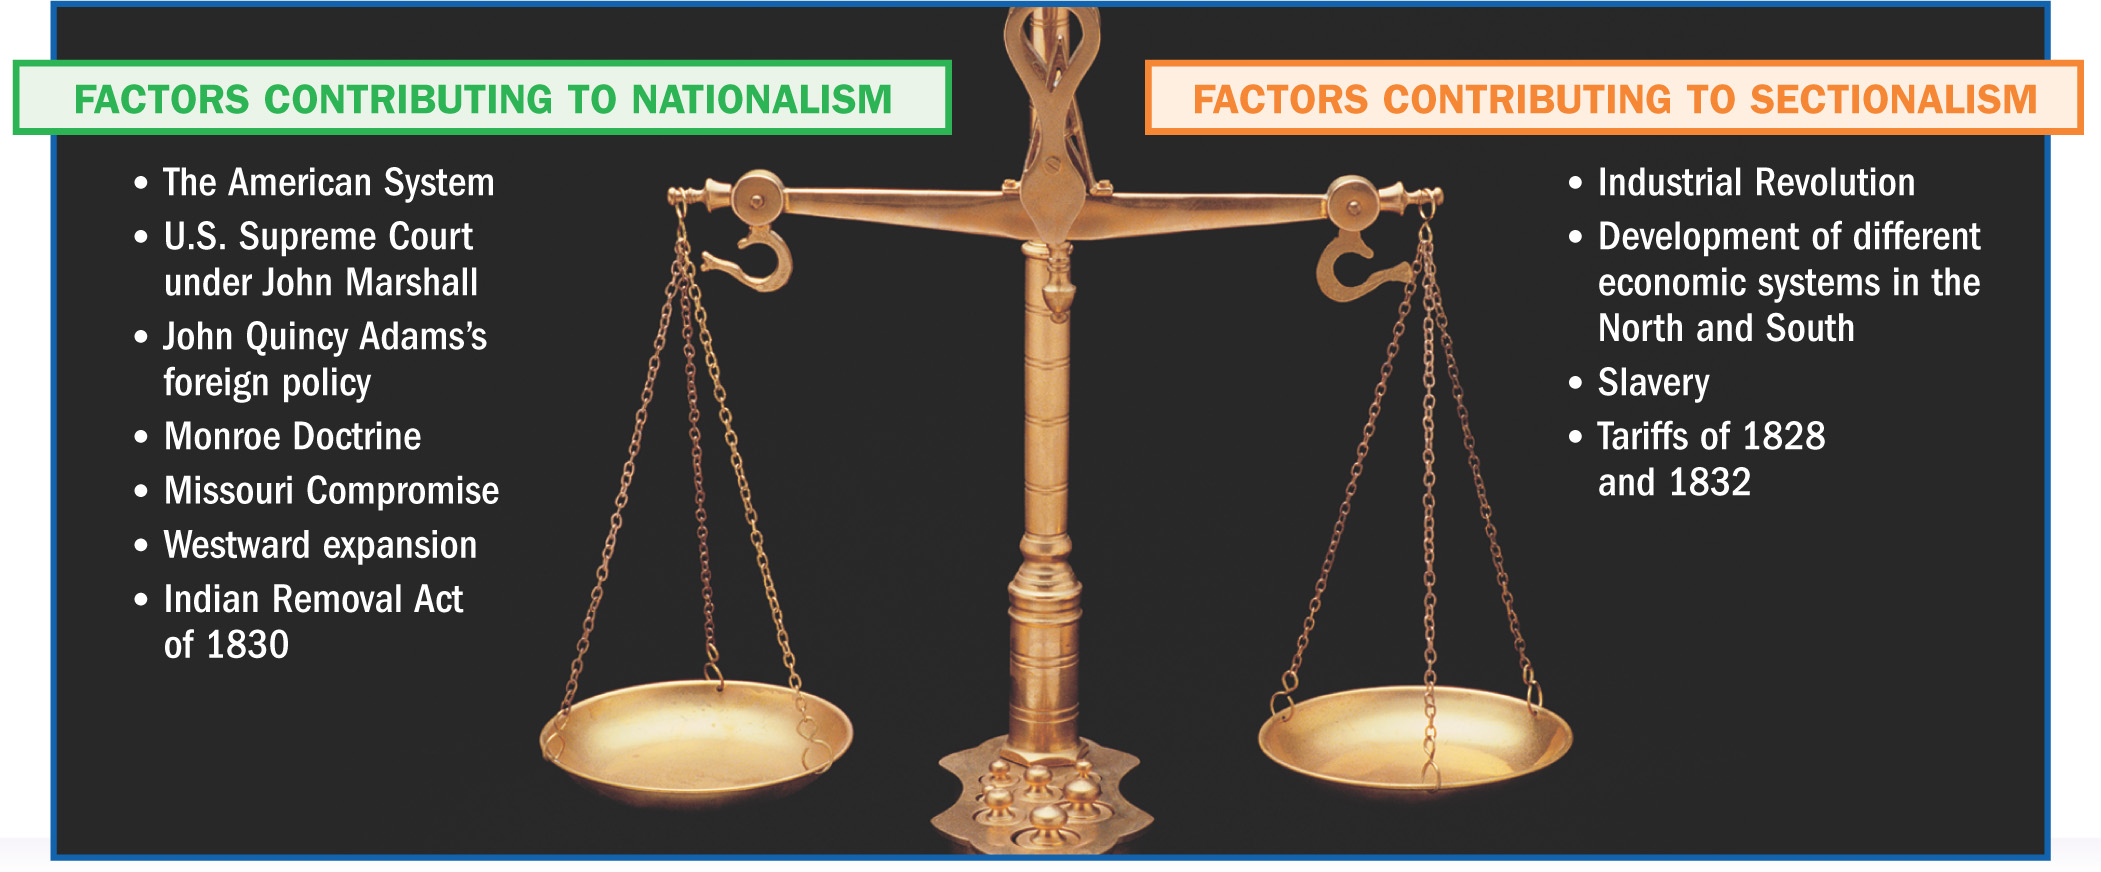 A chart shows a photo of a balanced scale. On the left side
of the scale is a list of factors contributing to Nationalism. On the right is a list of factors
contributing to Sectionalism.